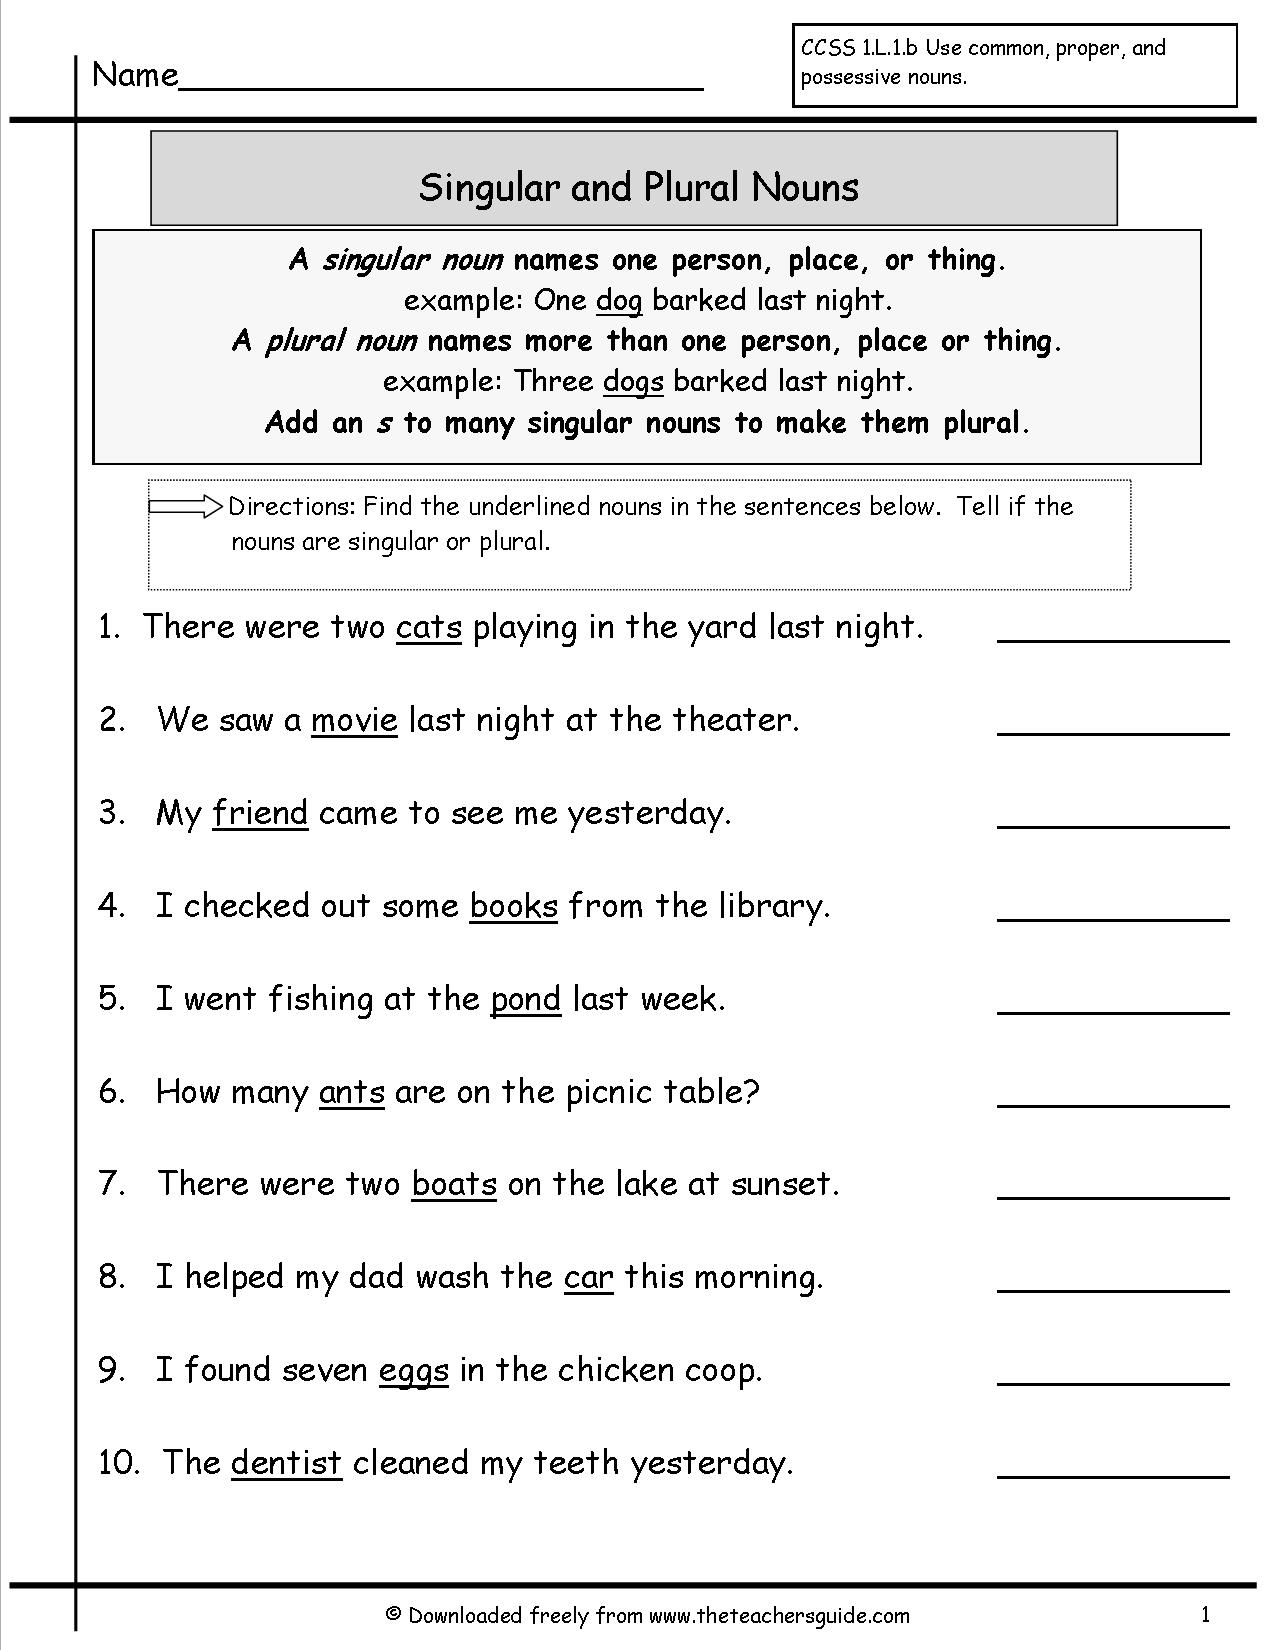 17 Best Images Of Sixth Grade Spelling Worksheets 6th Grade Math Worksheets Printable 7th